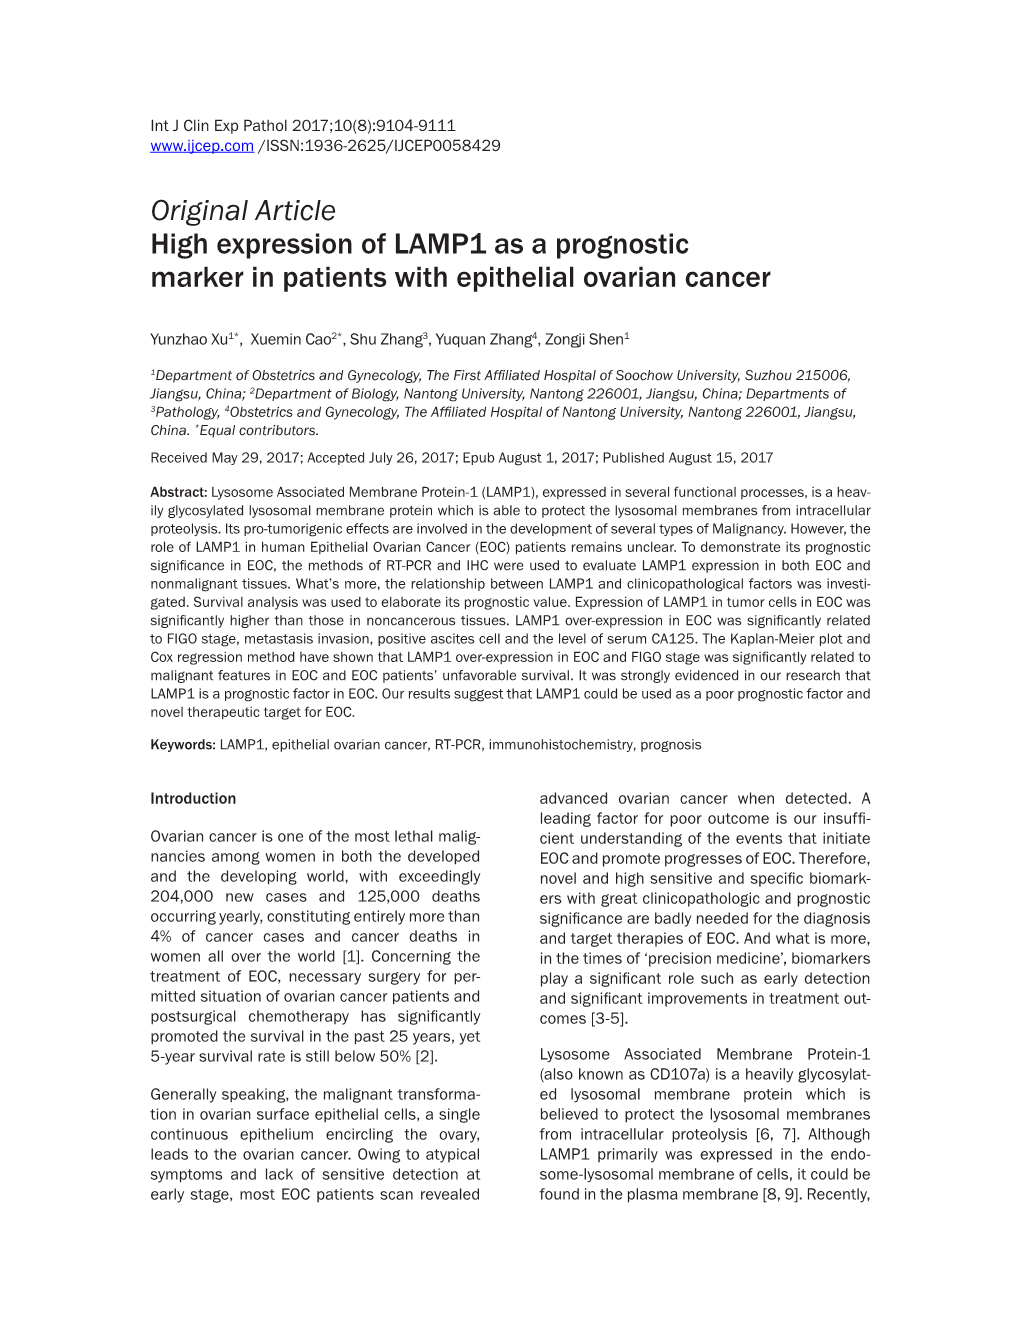 Original Article High Expression of LAMP1 As a Prognostic Marker in Patients with Epithelial Ovarian Cancer